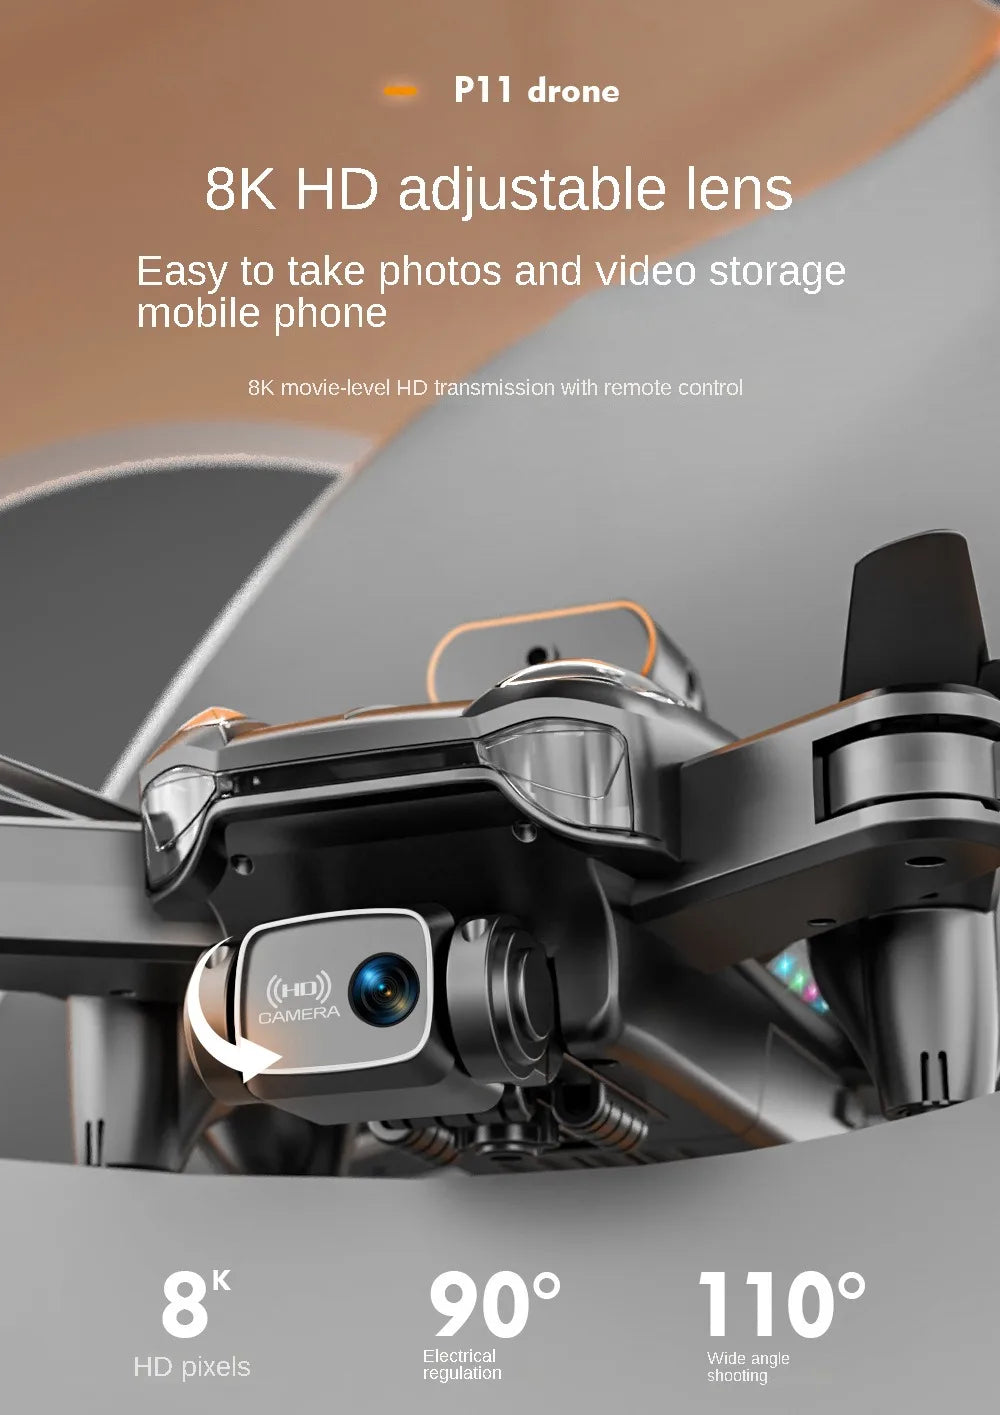 P11 Drone, p11 drone 8k hd adjustable lens easy to take